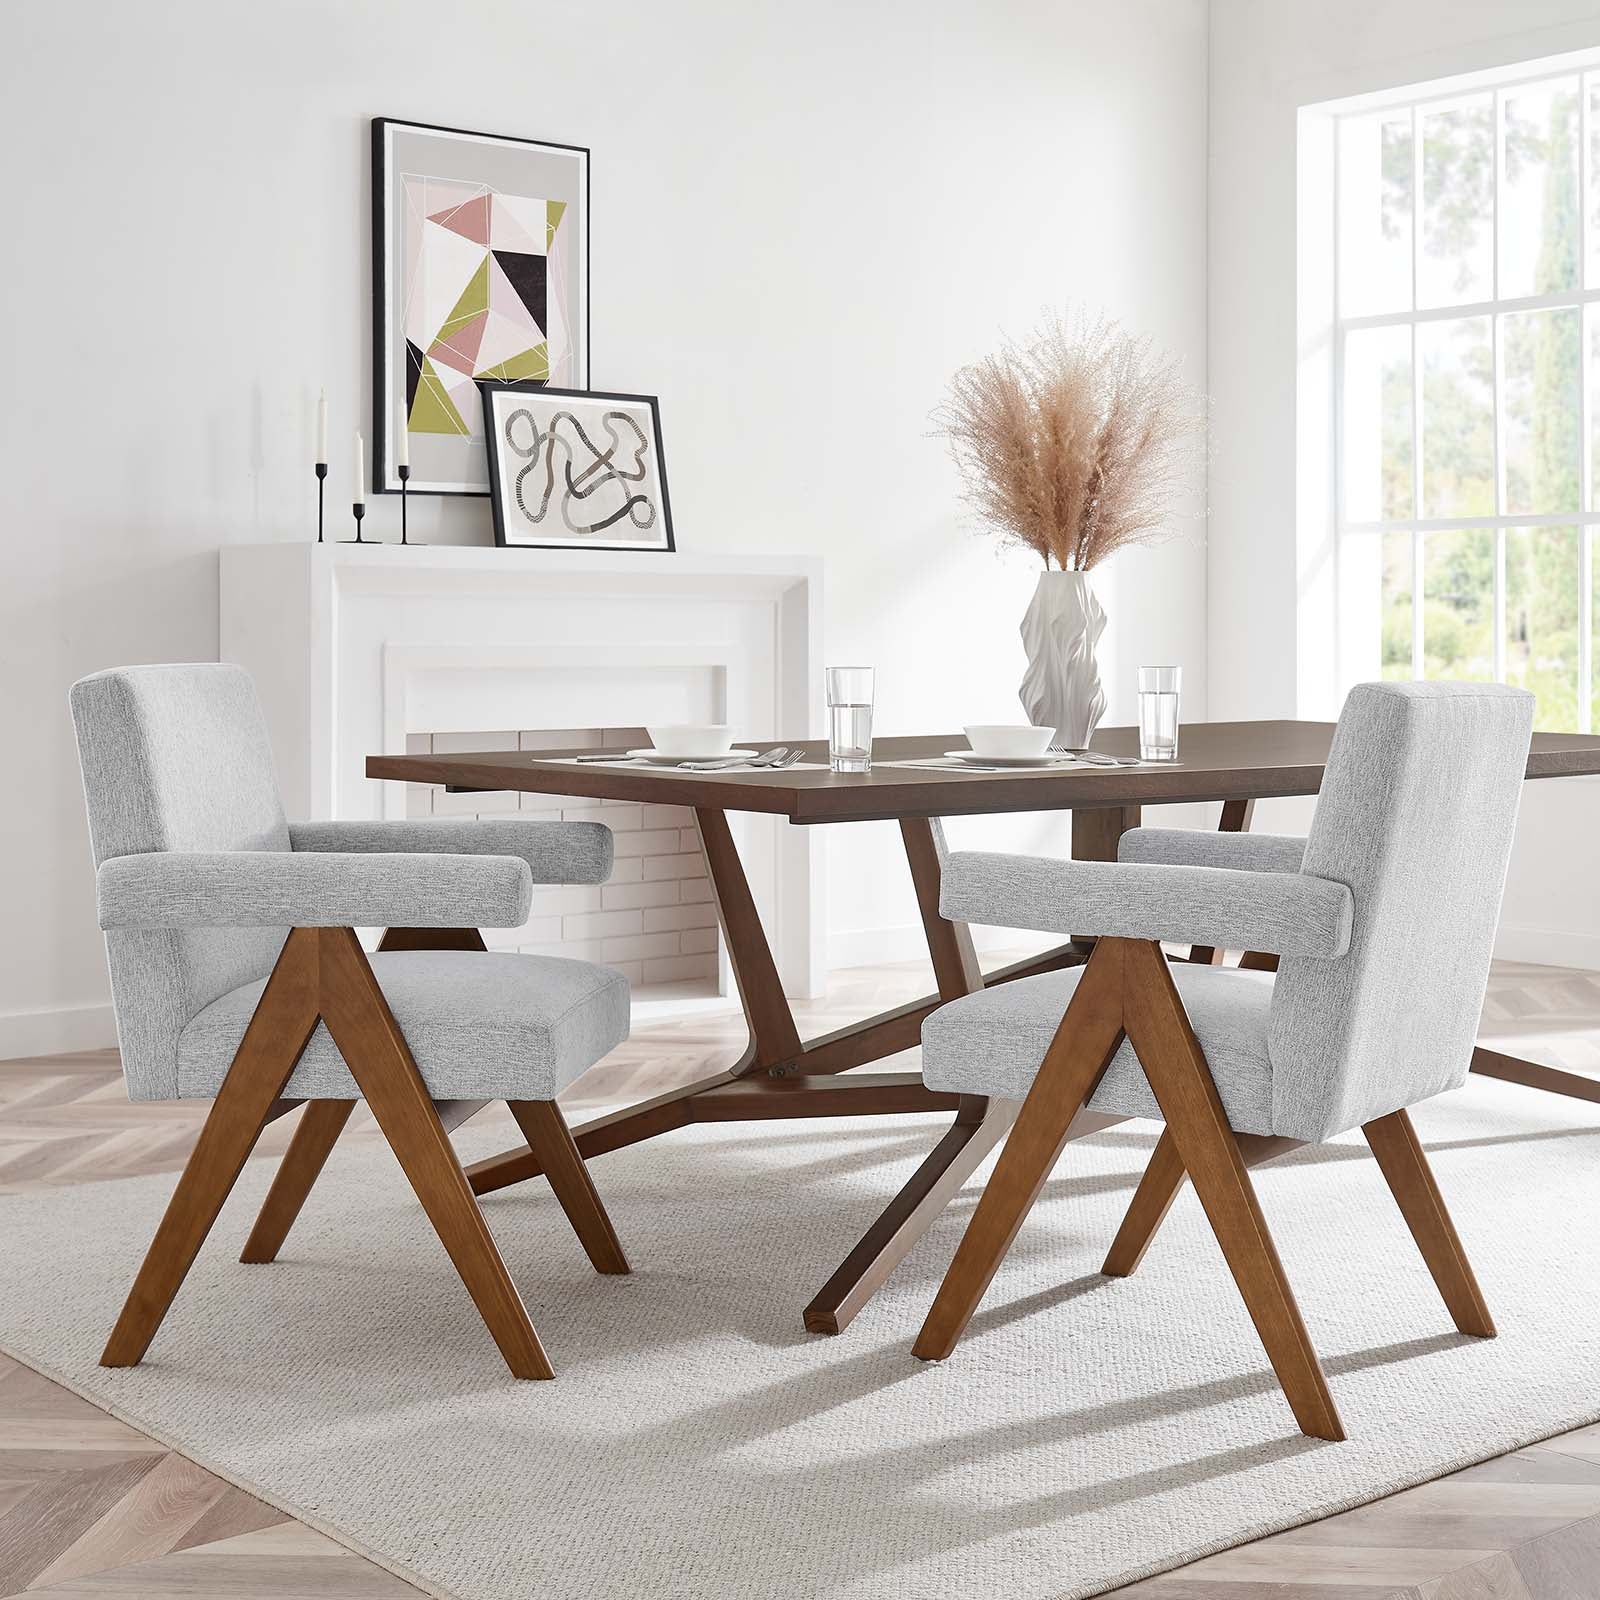 Lyra Fabric Dining Room Chair - Set of 2 - East Shore Modern Home Furnishings